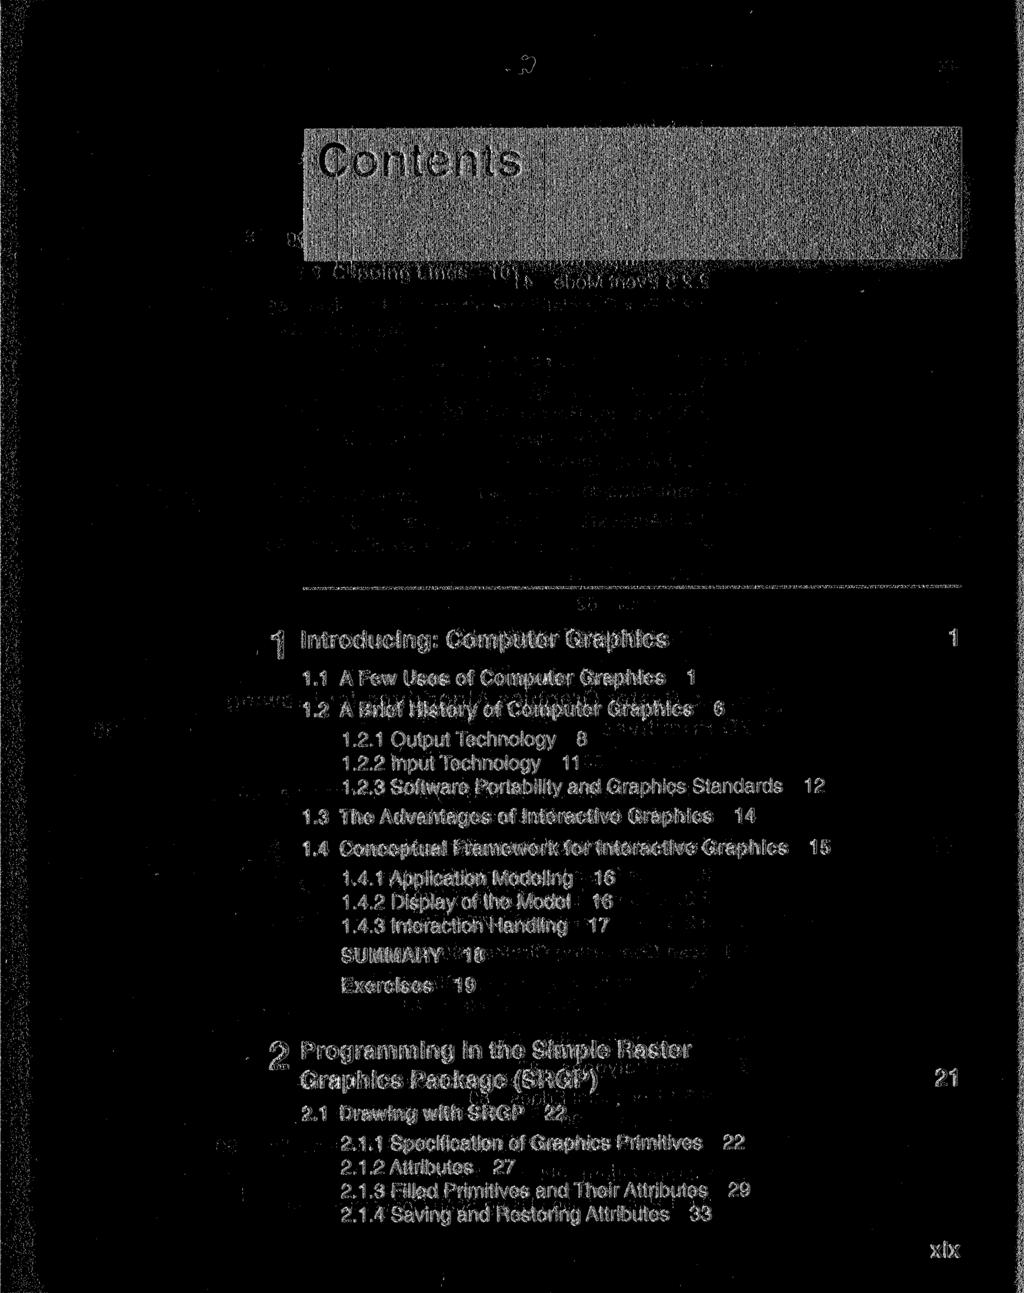 "\ Introducing: Computer Graphics 1.1 A Few Uses of Computer Graphics 1 1.2 A Brief History of Computer Graphics 6 1.2.1 Output Technology 8 1.2.2 Input Technology 11 1.2.3 Software Portability and Graphics Standards 12 1.